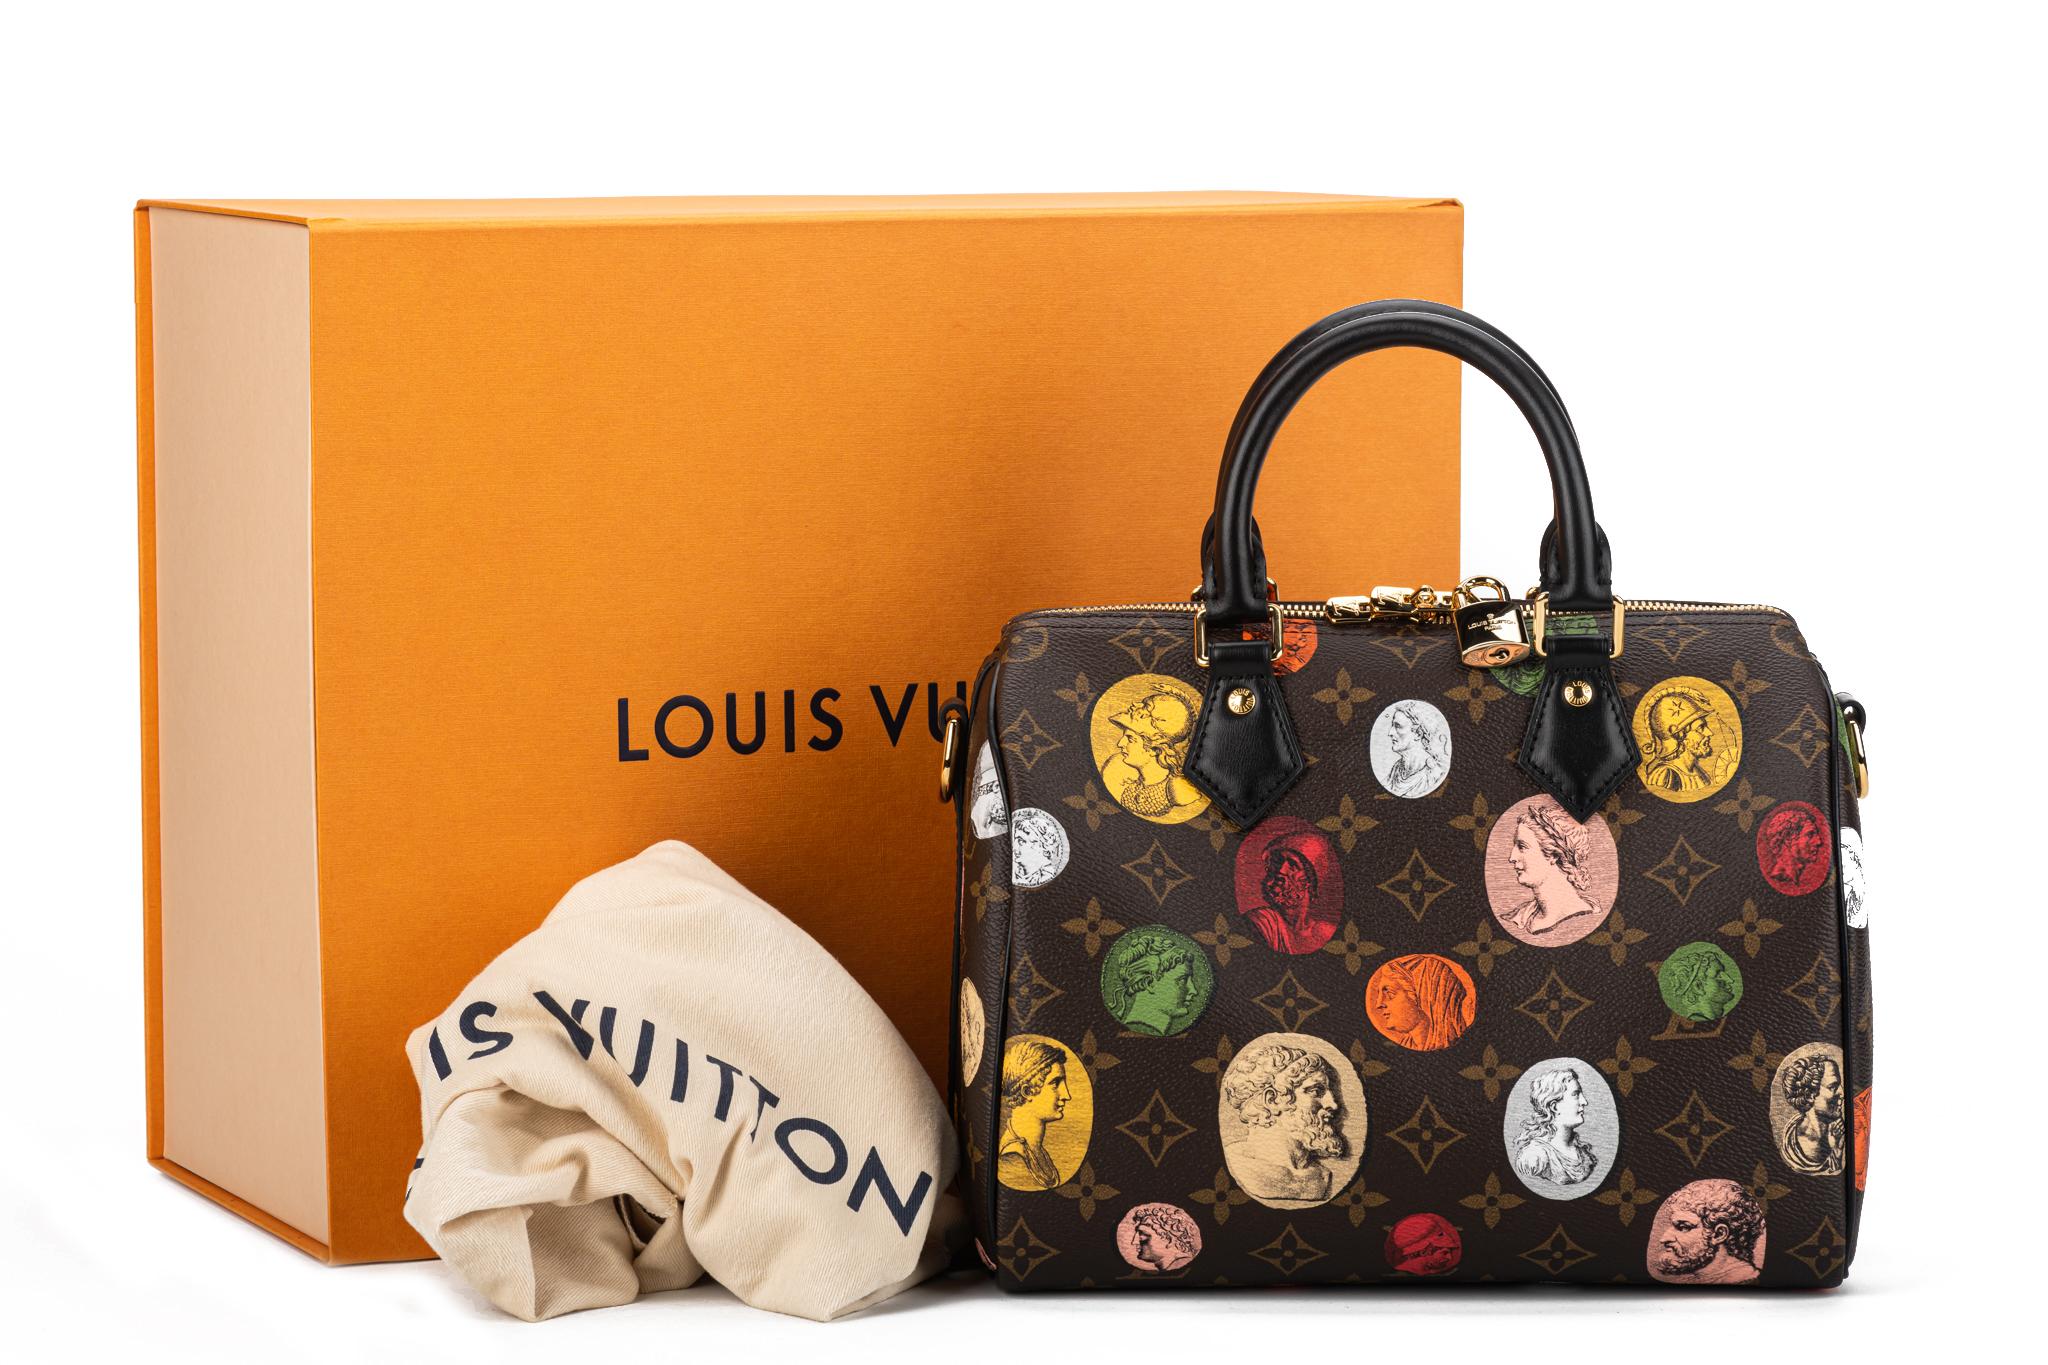 Louis Vuitton 2021 limited edition Fornasetti collection designed by Nicolas Ghesquière. Sold out worldwide speedy bandouliere 25 cm in printed monogram coated canvas, gold metal hardware and multicolor cameo patches .Detachable strap, lock and 2